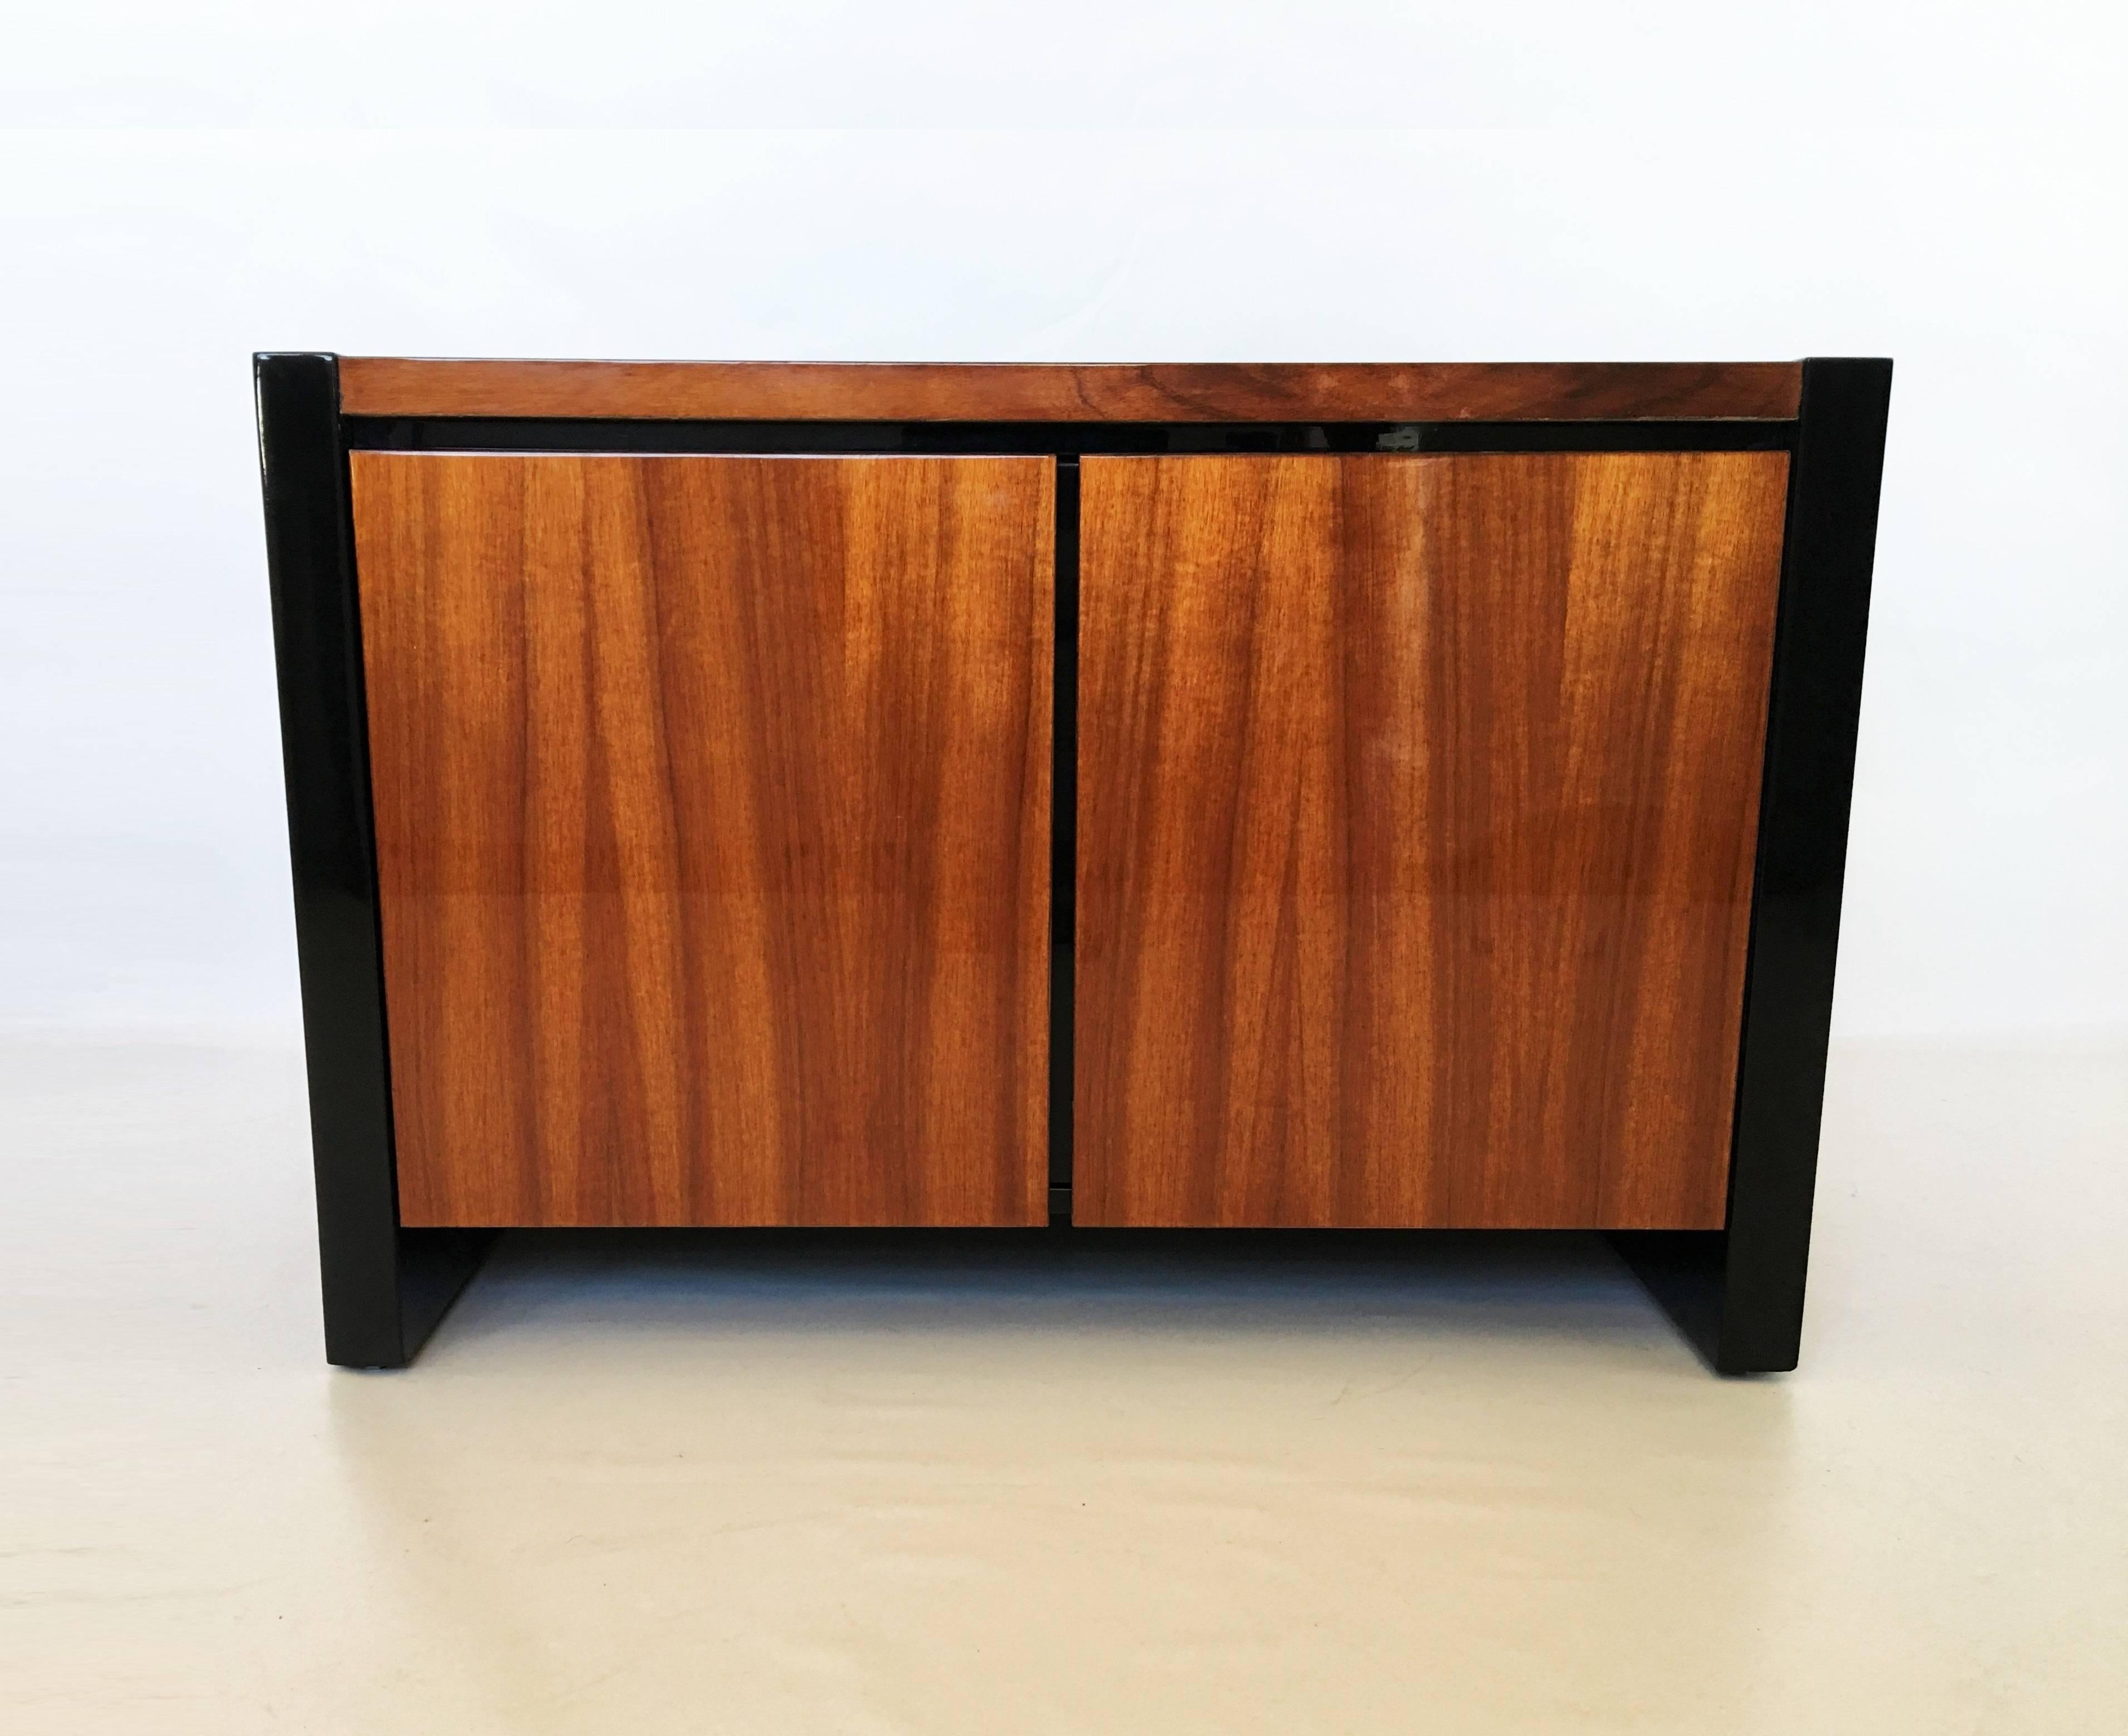 Pair of Black Lacquer and Koa Wood Nightstands by Henredon In Excellent Condition For Sale In Dallas, TX